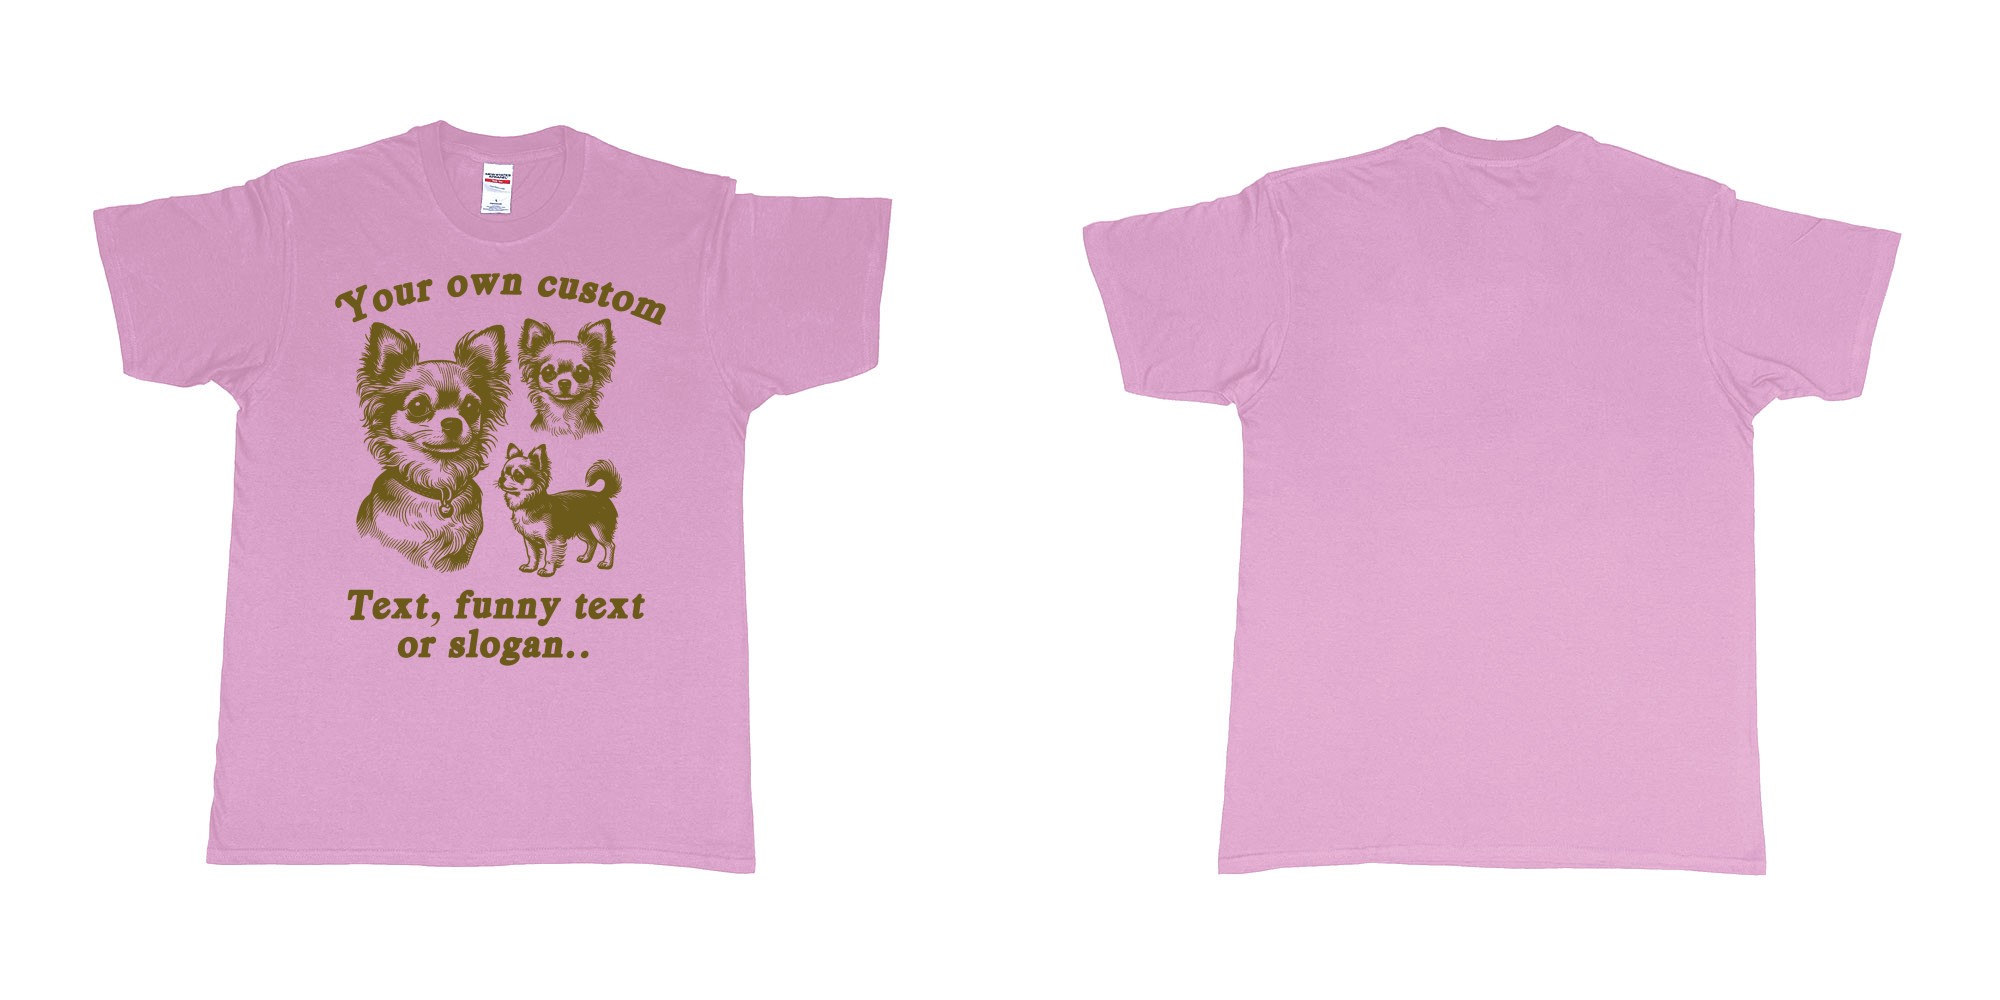 Custom tshirt design chiwawa dogs drawing custom own text printing in fabric color light-pink choice your own text made in Bali by The Pirate Way